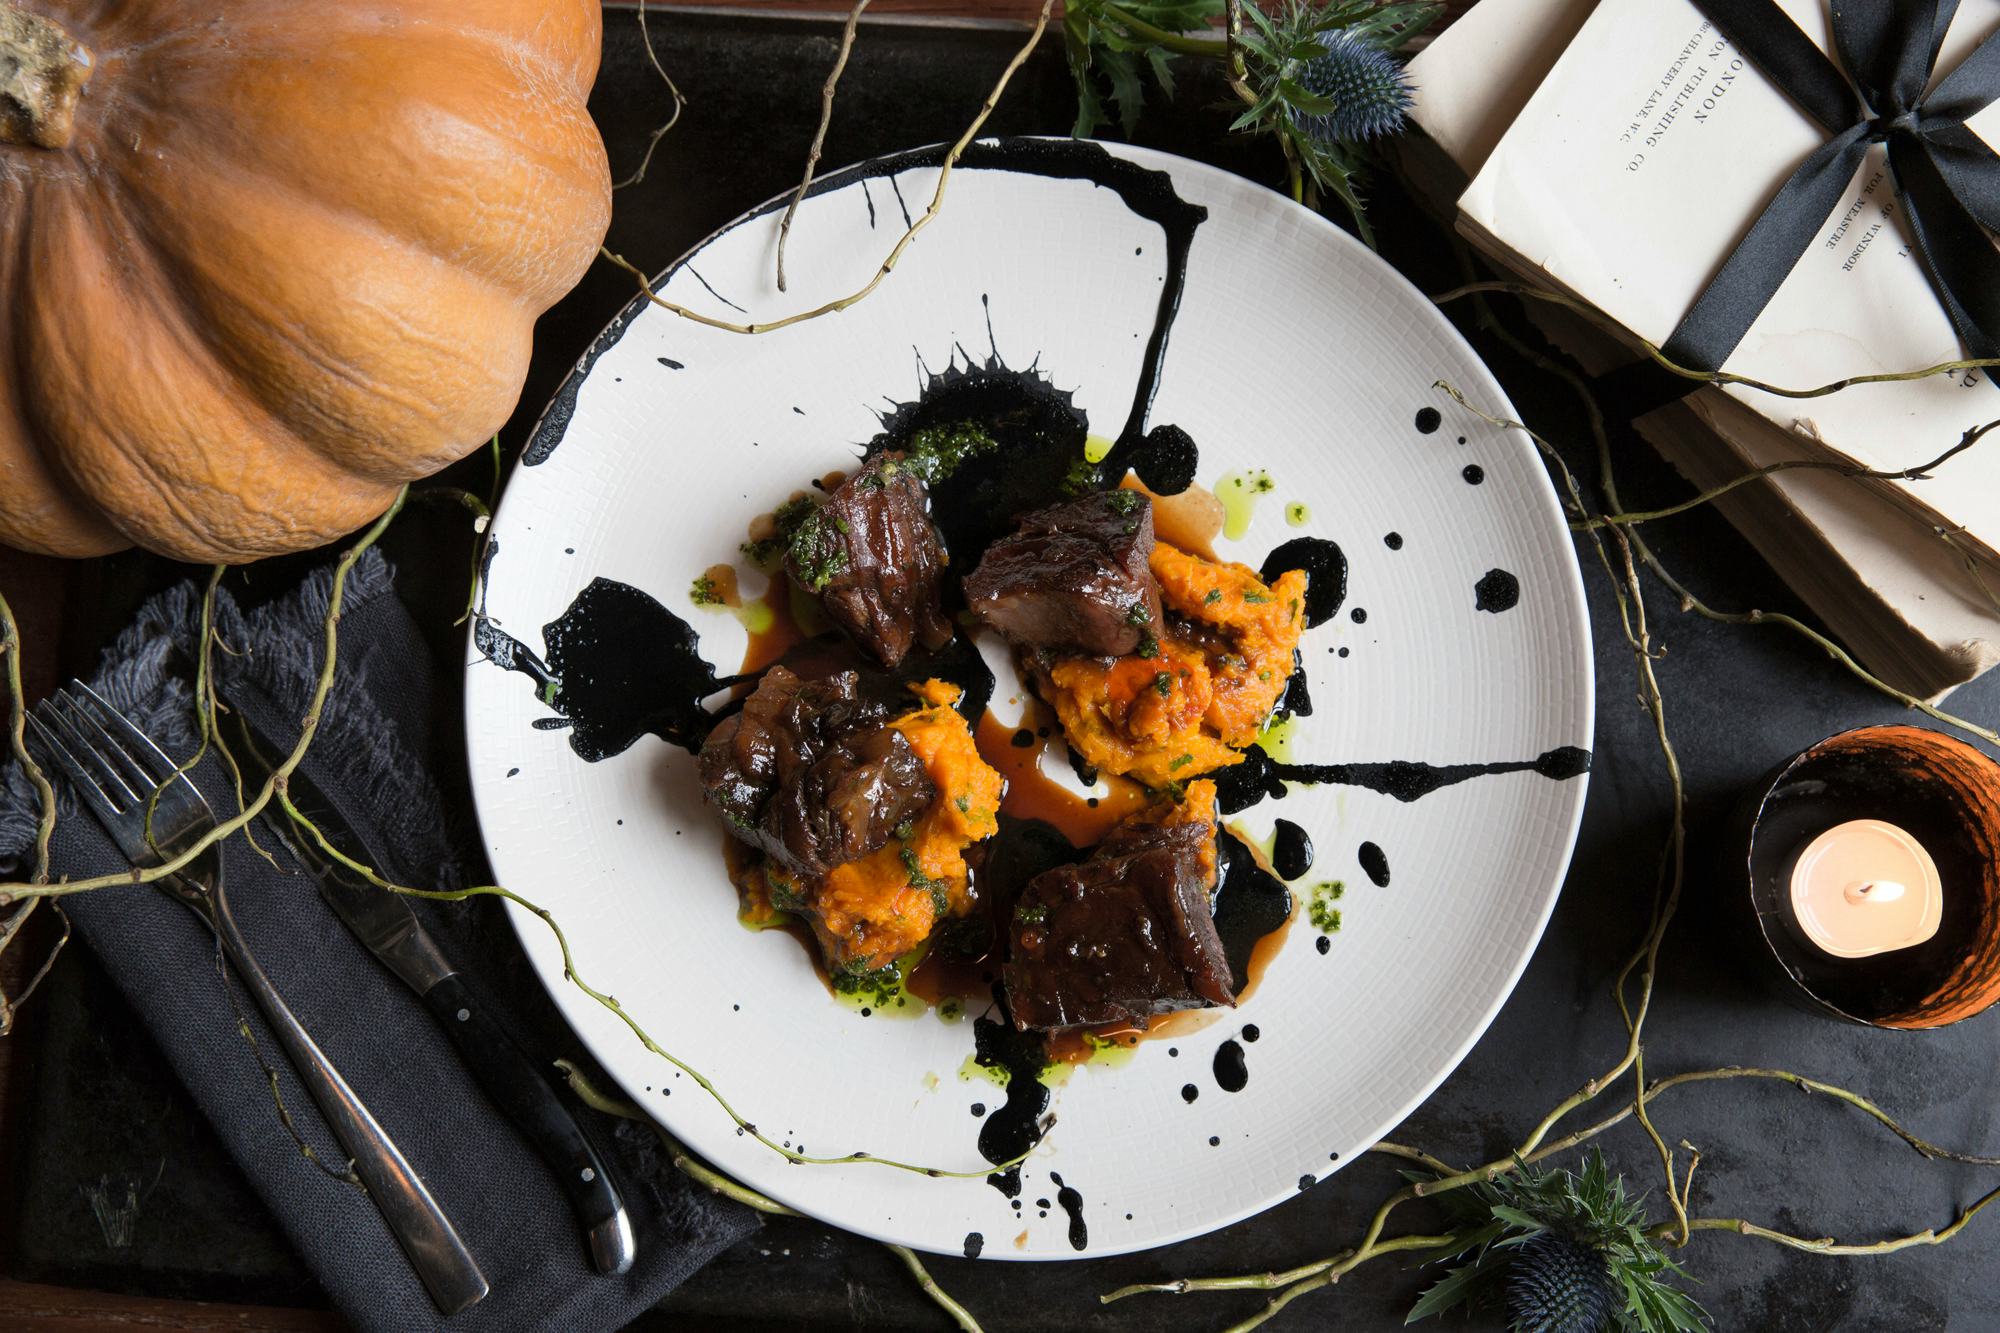 Gordon Ramsay’s Street Kitchens to host Halloween dinners for groups